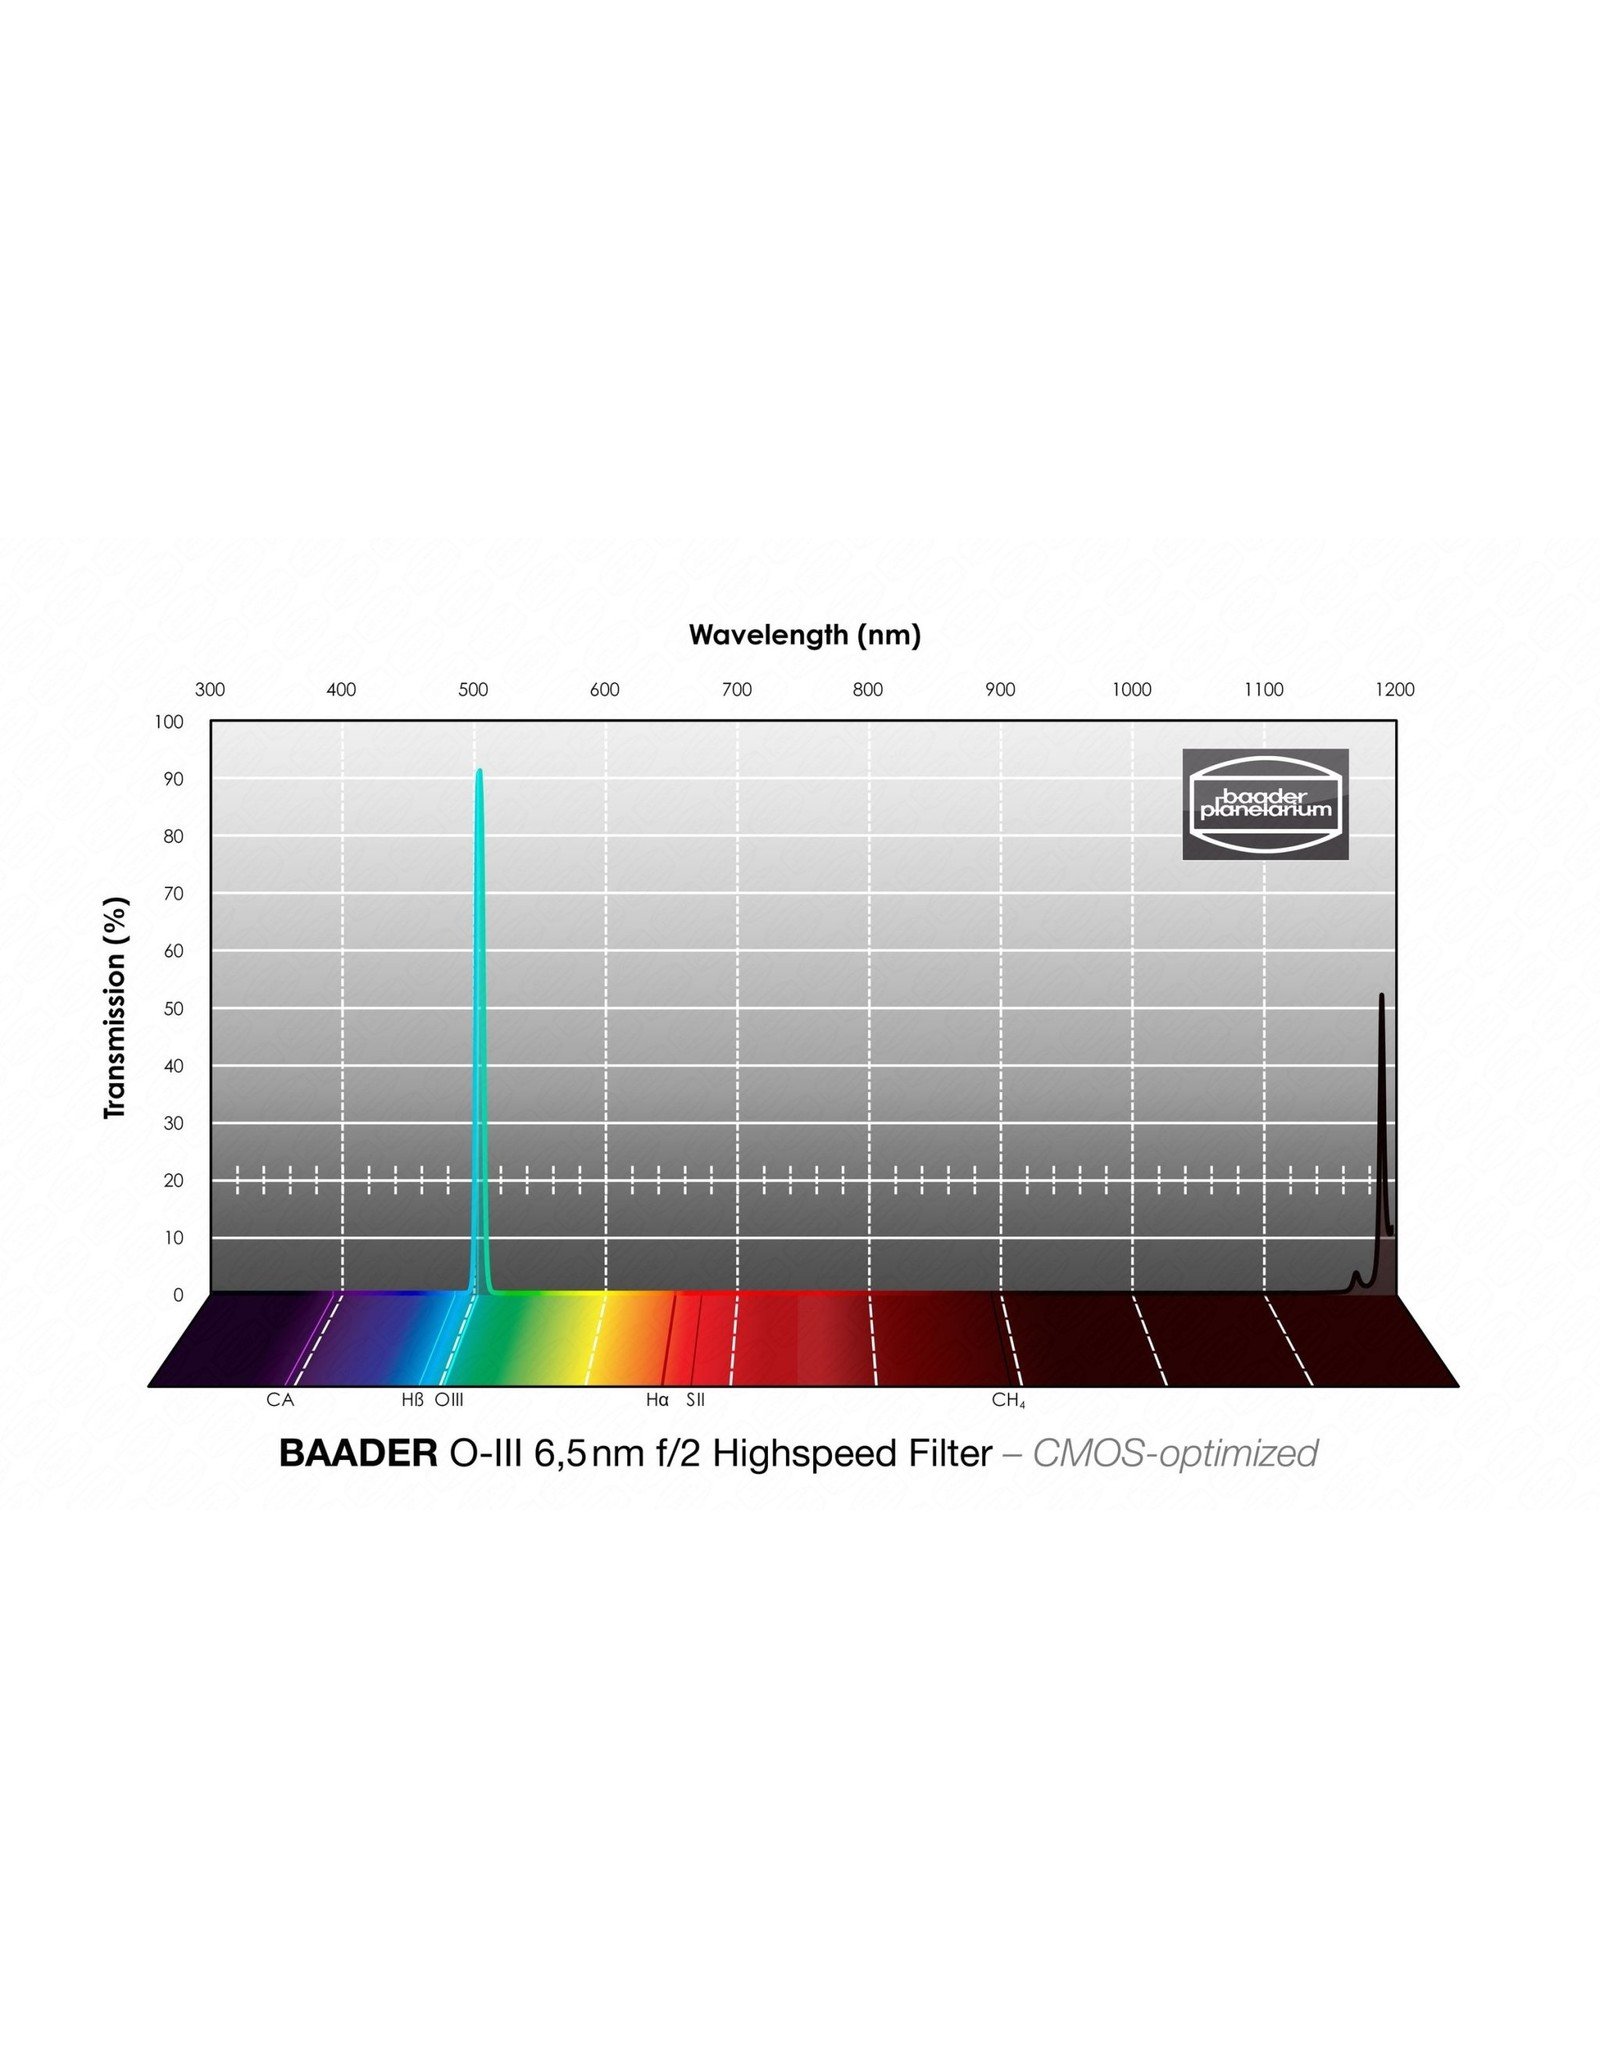 Baader Planetarium Baader 6.5nm f/2 Highspeed Filter set – CMOS-optimized - H-alpha, O-III, S-11 (Specify Size)